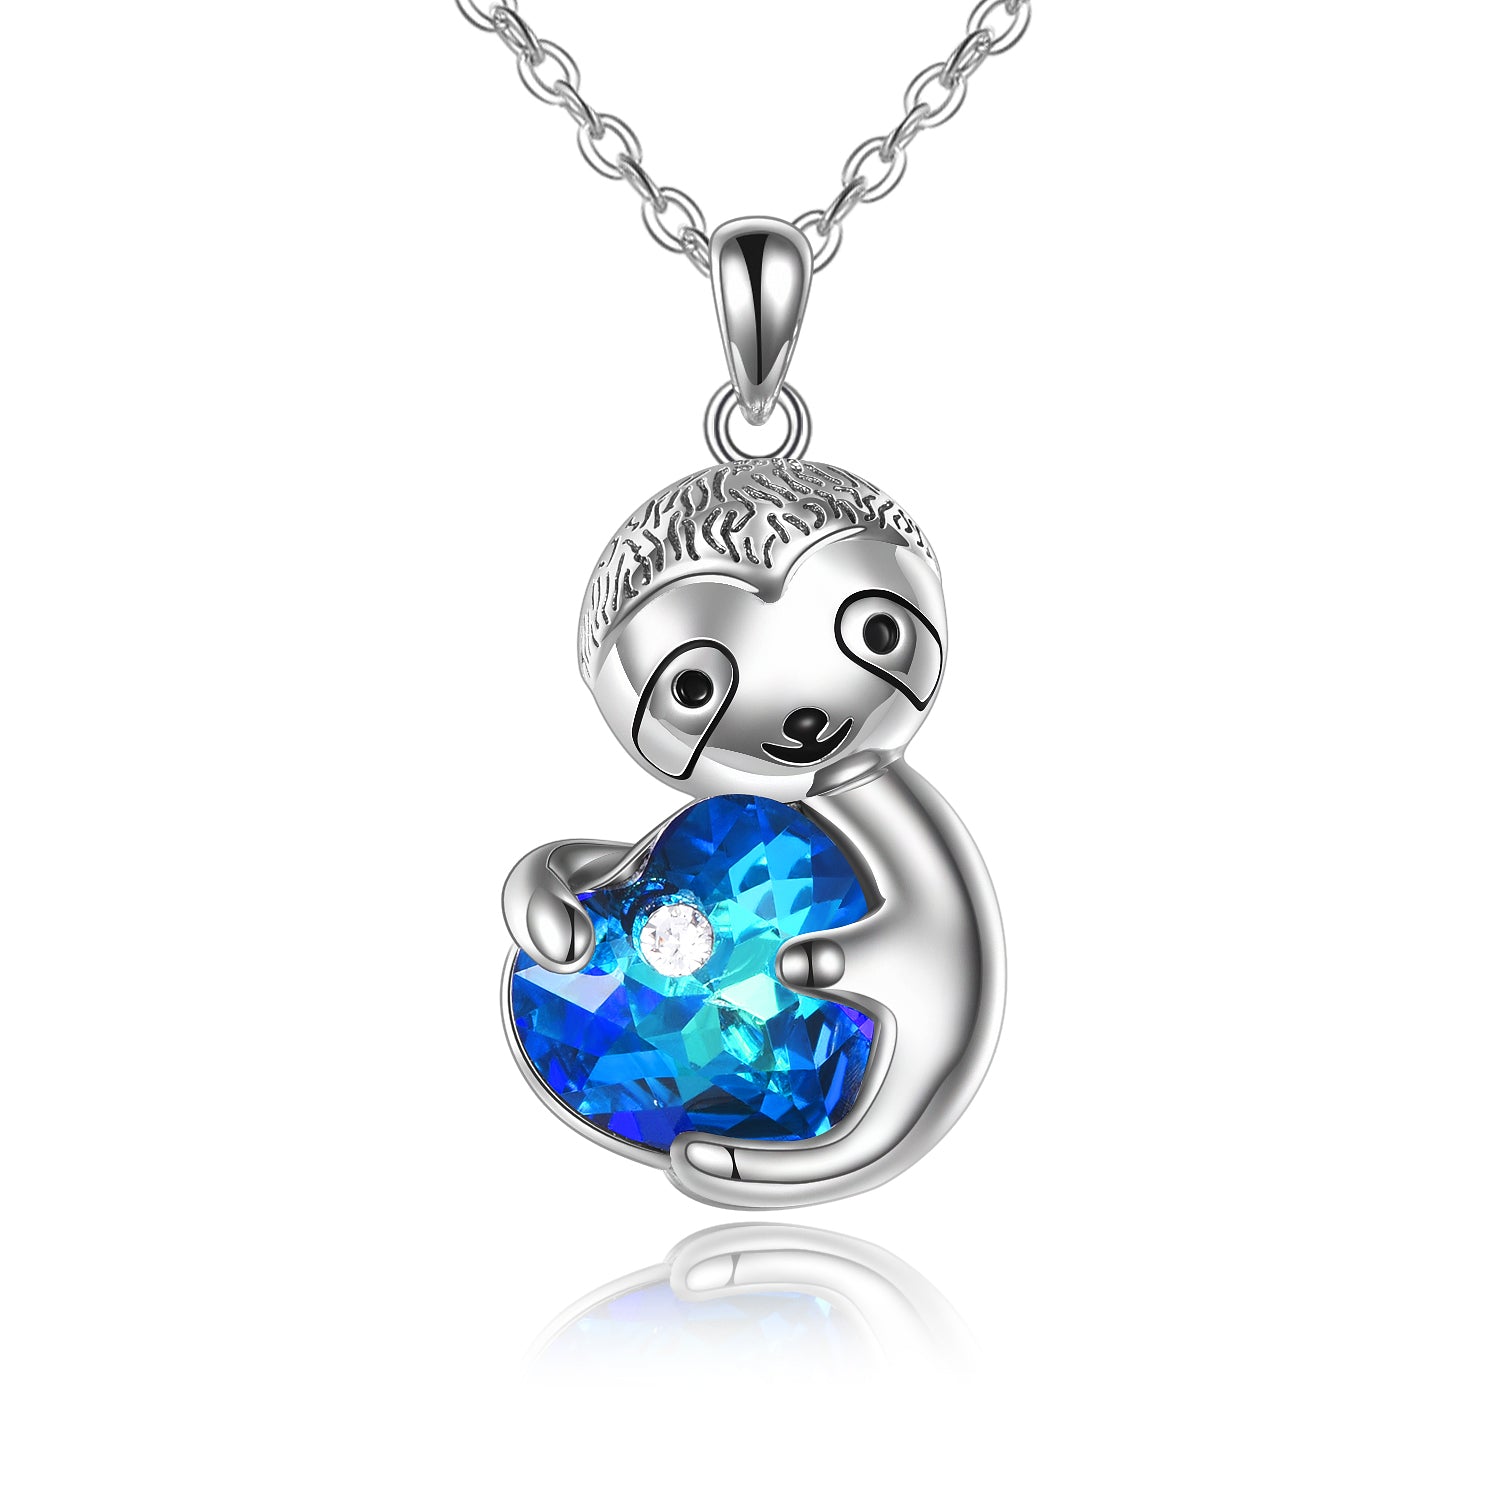 Sloth Crystal Pendant Necklace Sterling Silver Animal Jewelry Gift